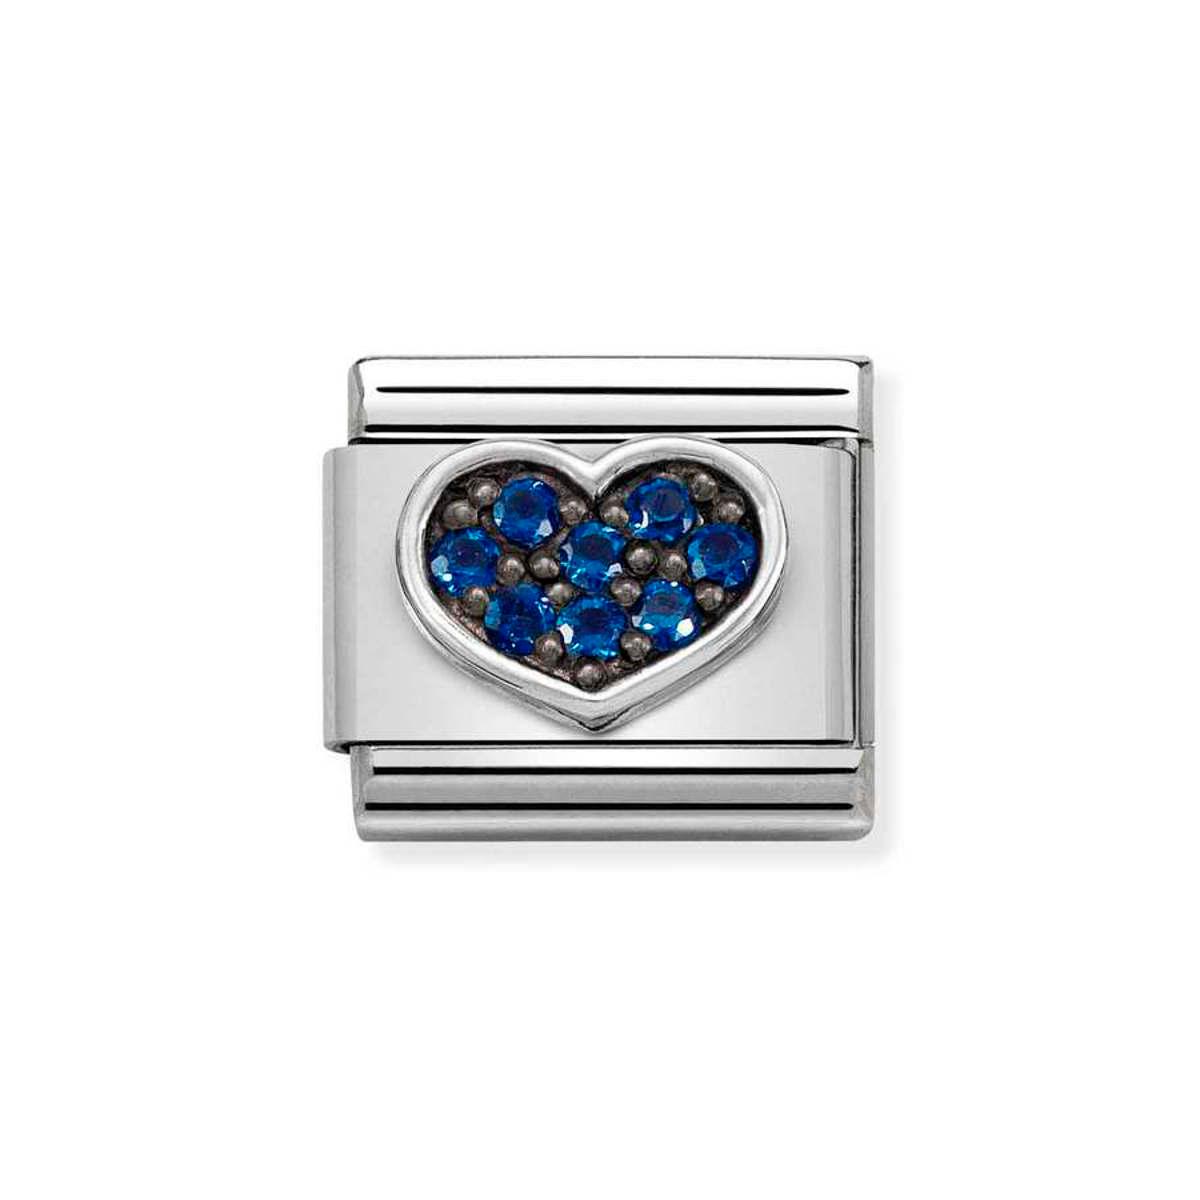 Oxidised Symbols 925 sterling silver and CZ Blue Heart